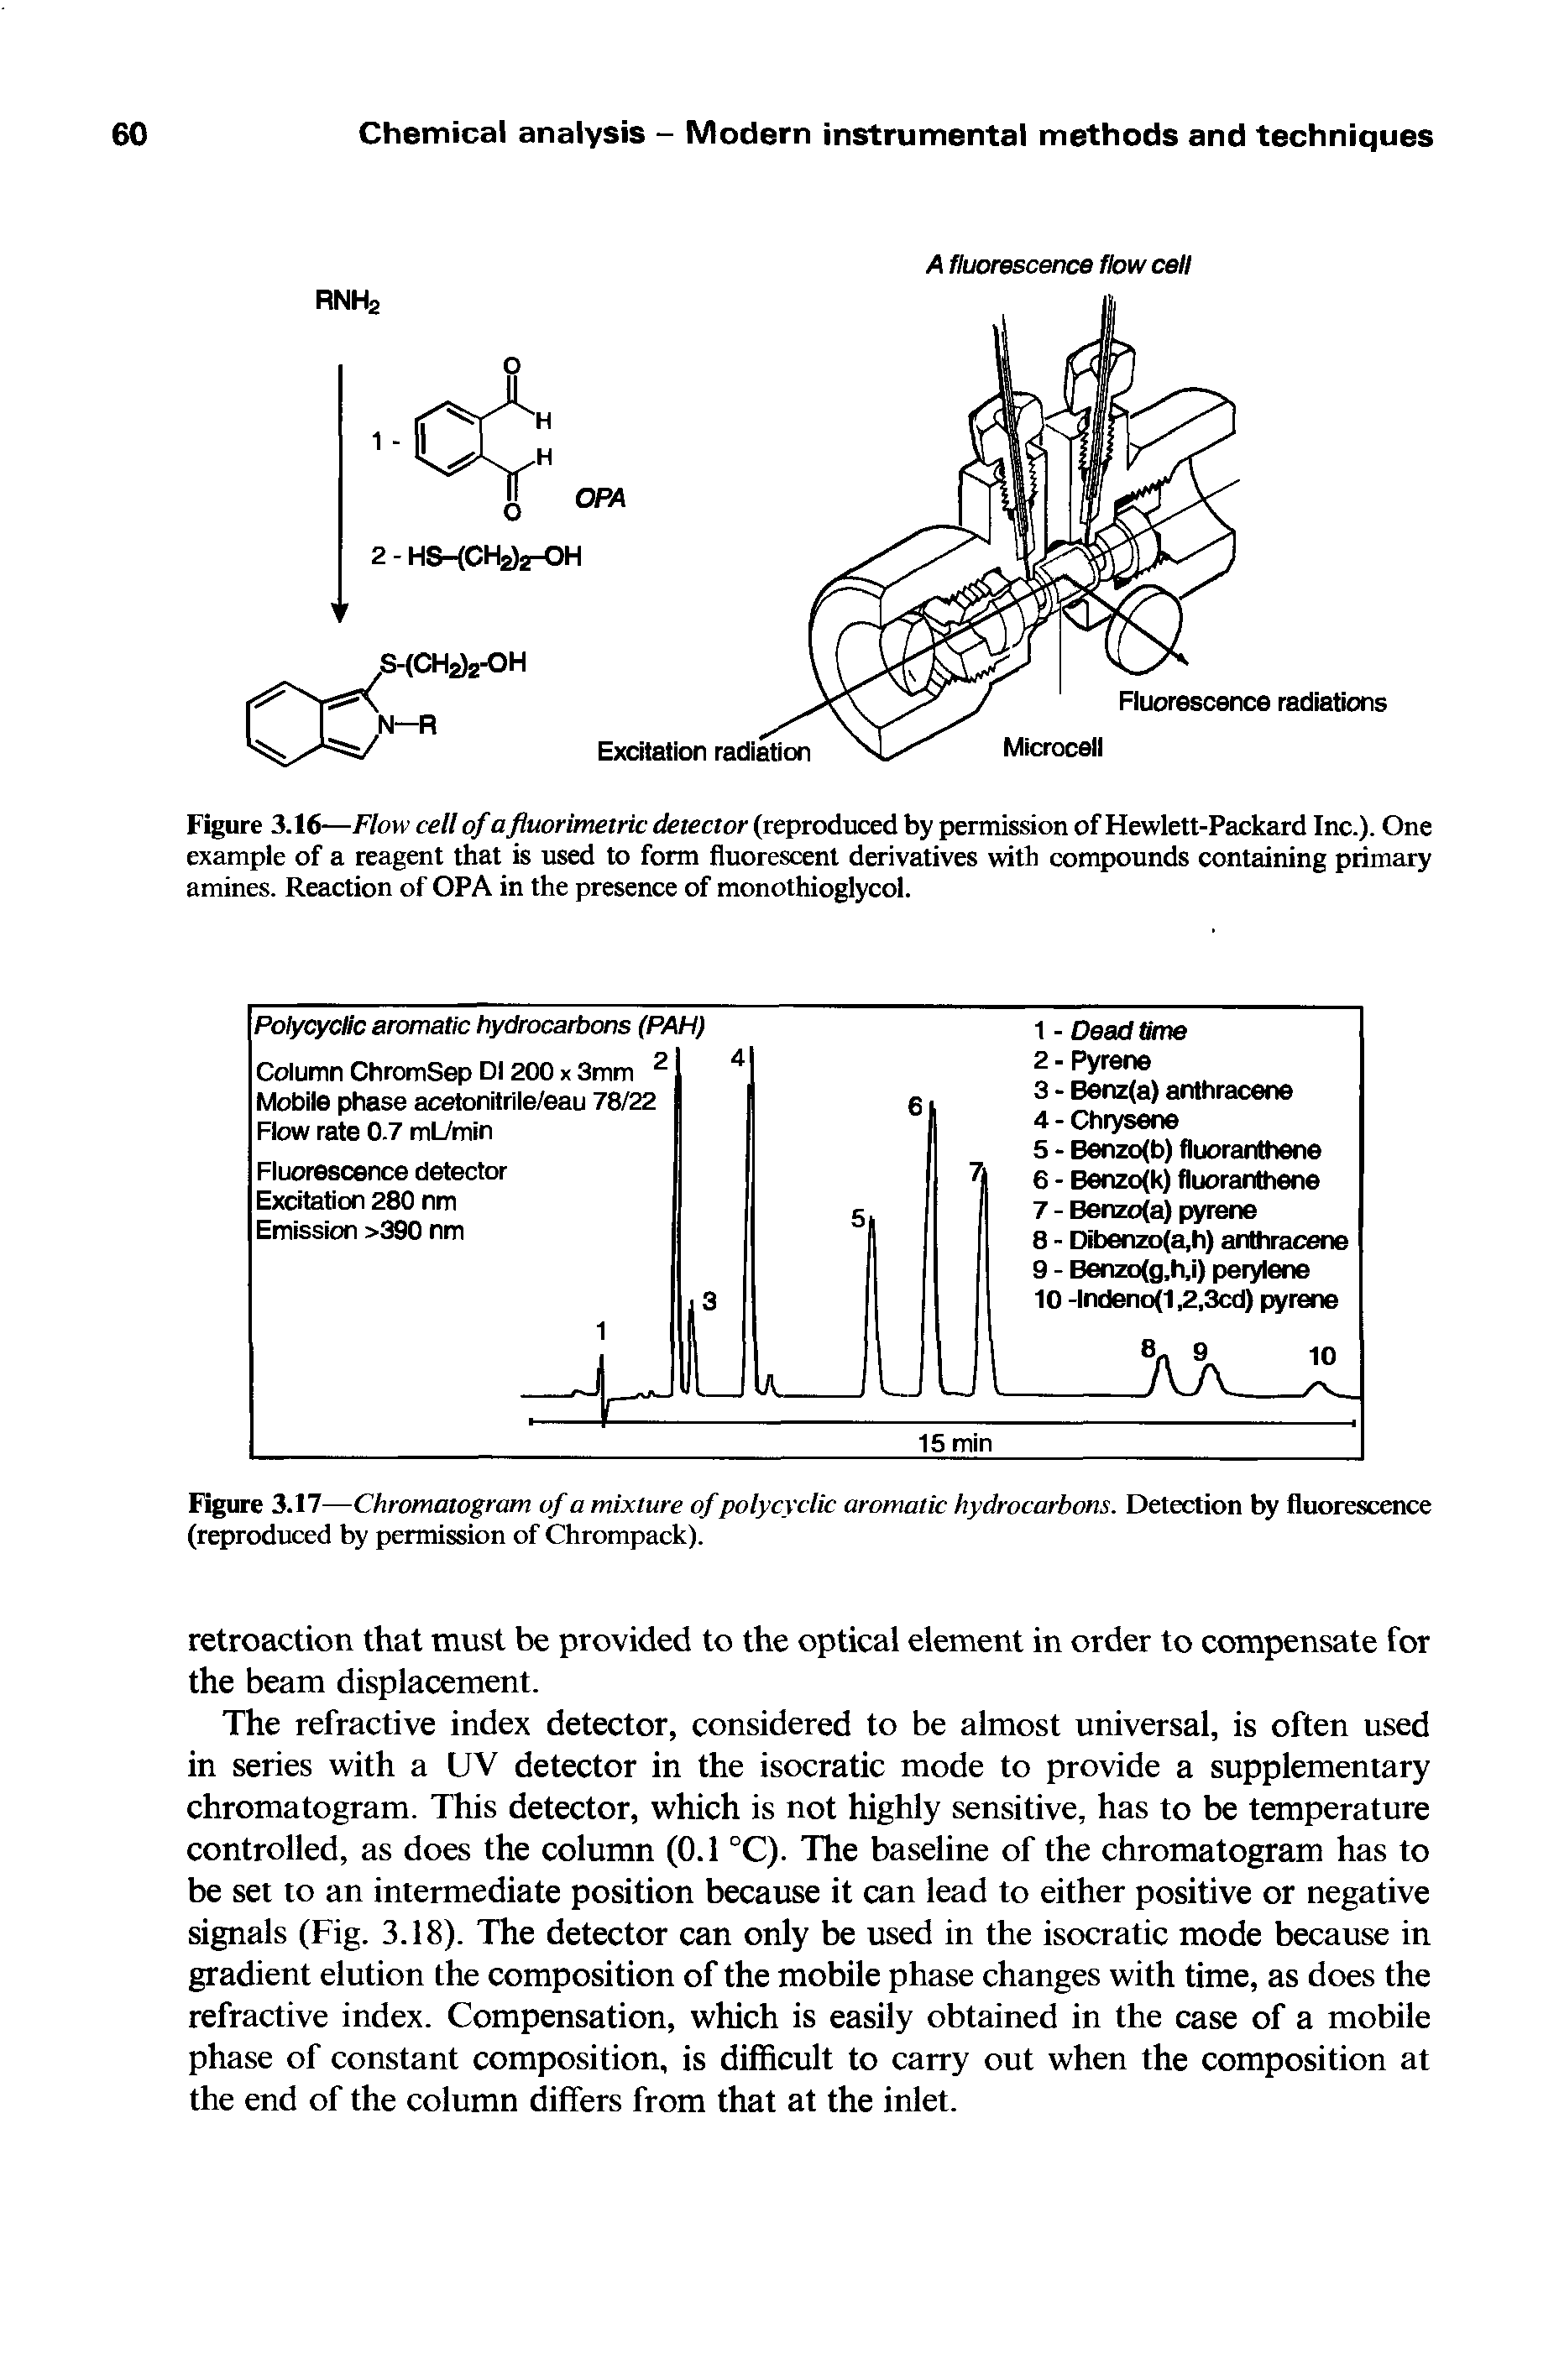 Figure 3.16—Flow cell of a fiuorimetric detector (reproduced by permission of Hewlett-Packard Inc.). One example of a reagent that is used to form fluorescent derivatives with compounds containing primary amines. Reaction of OPA in the presence of monothioglycol.